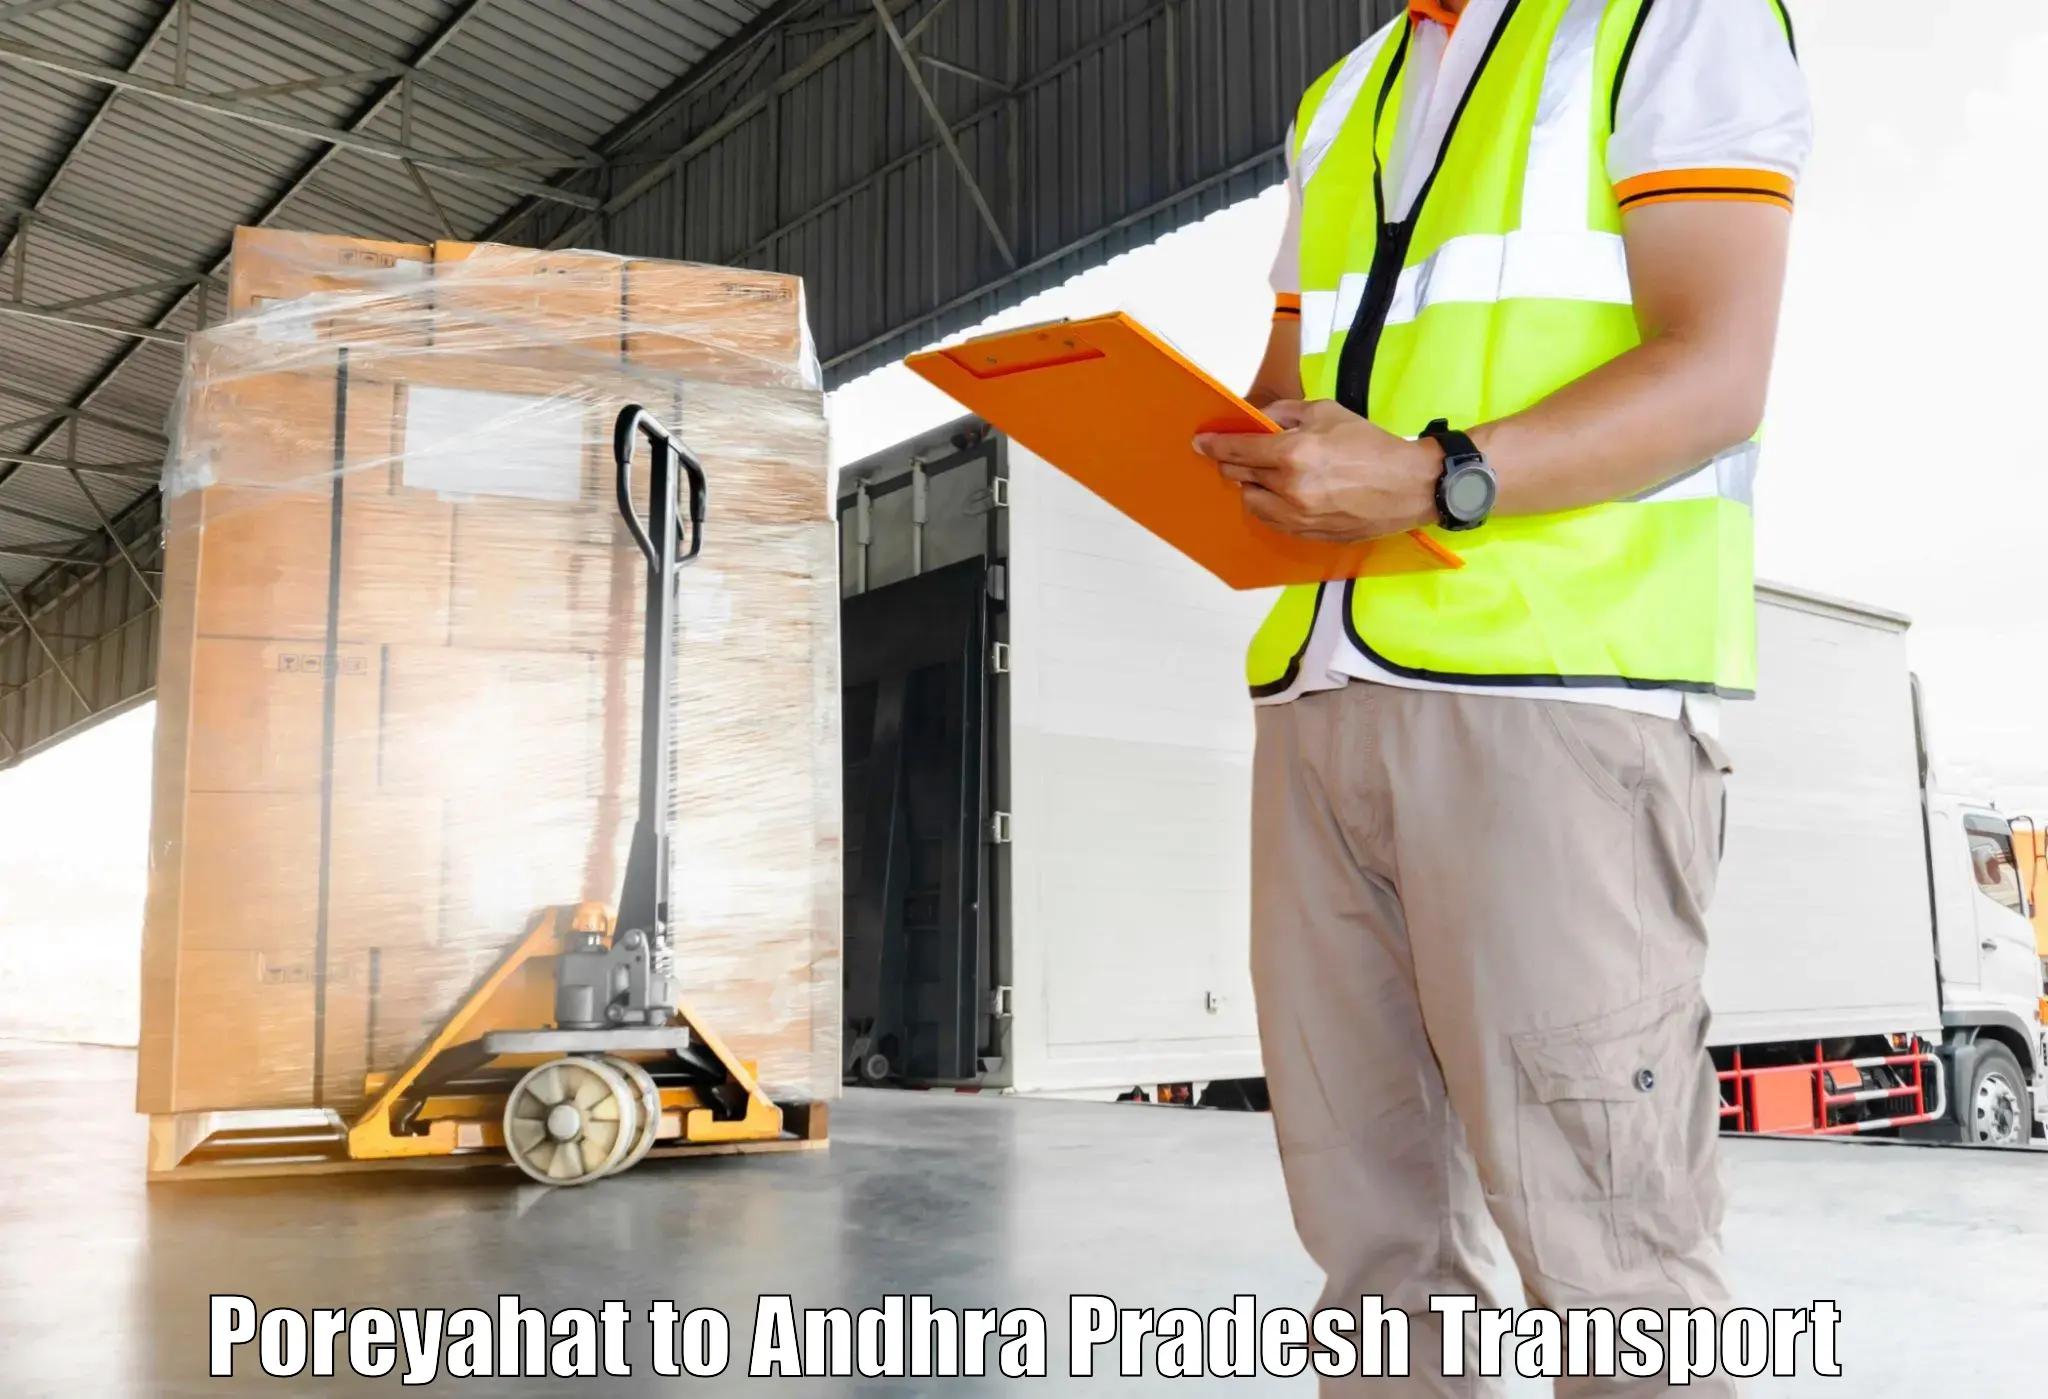 Truck transport companies in India Poreyahat to Anantapur